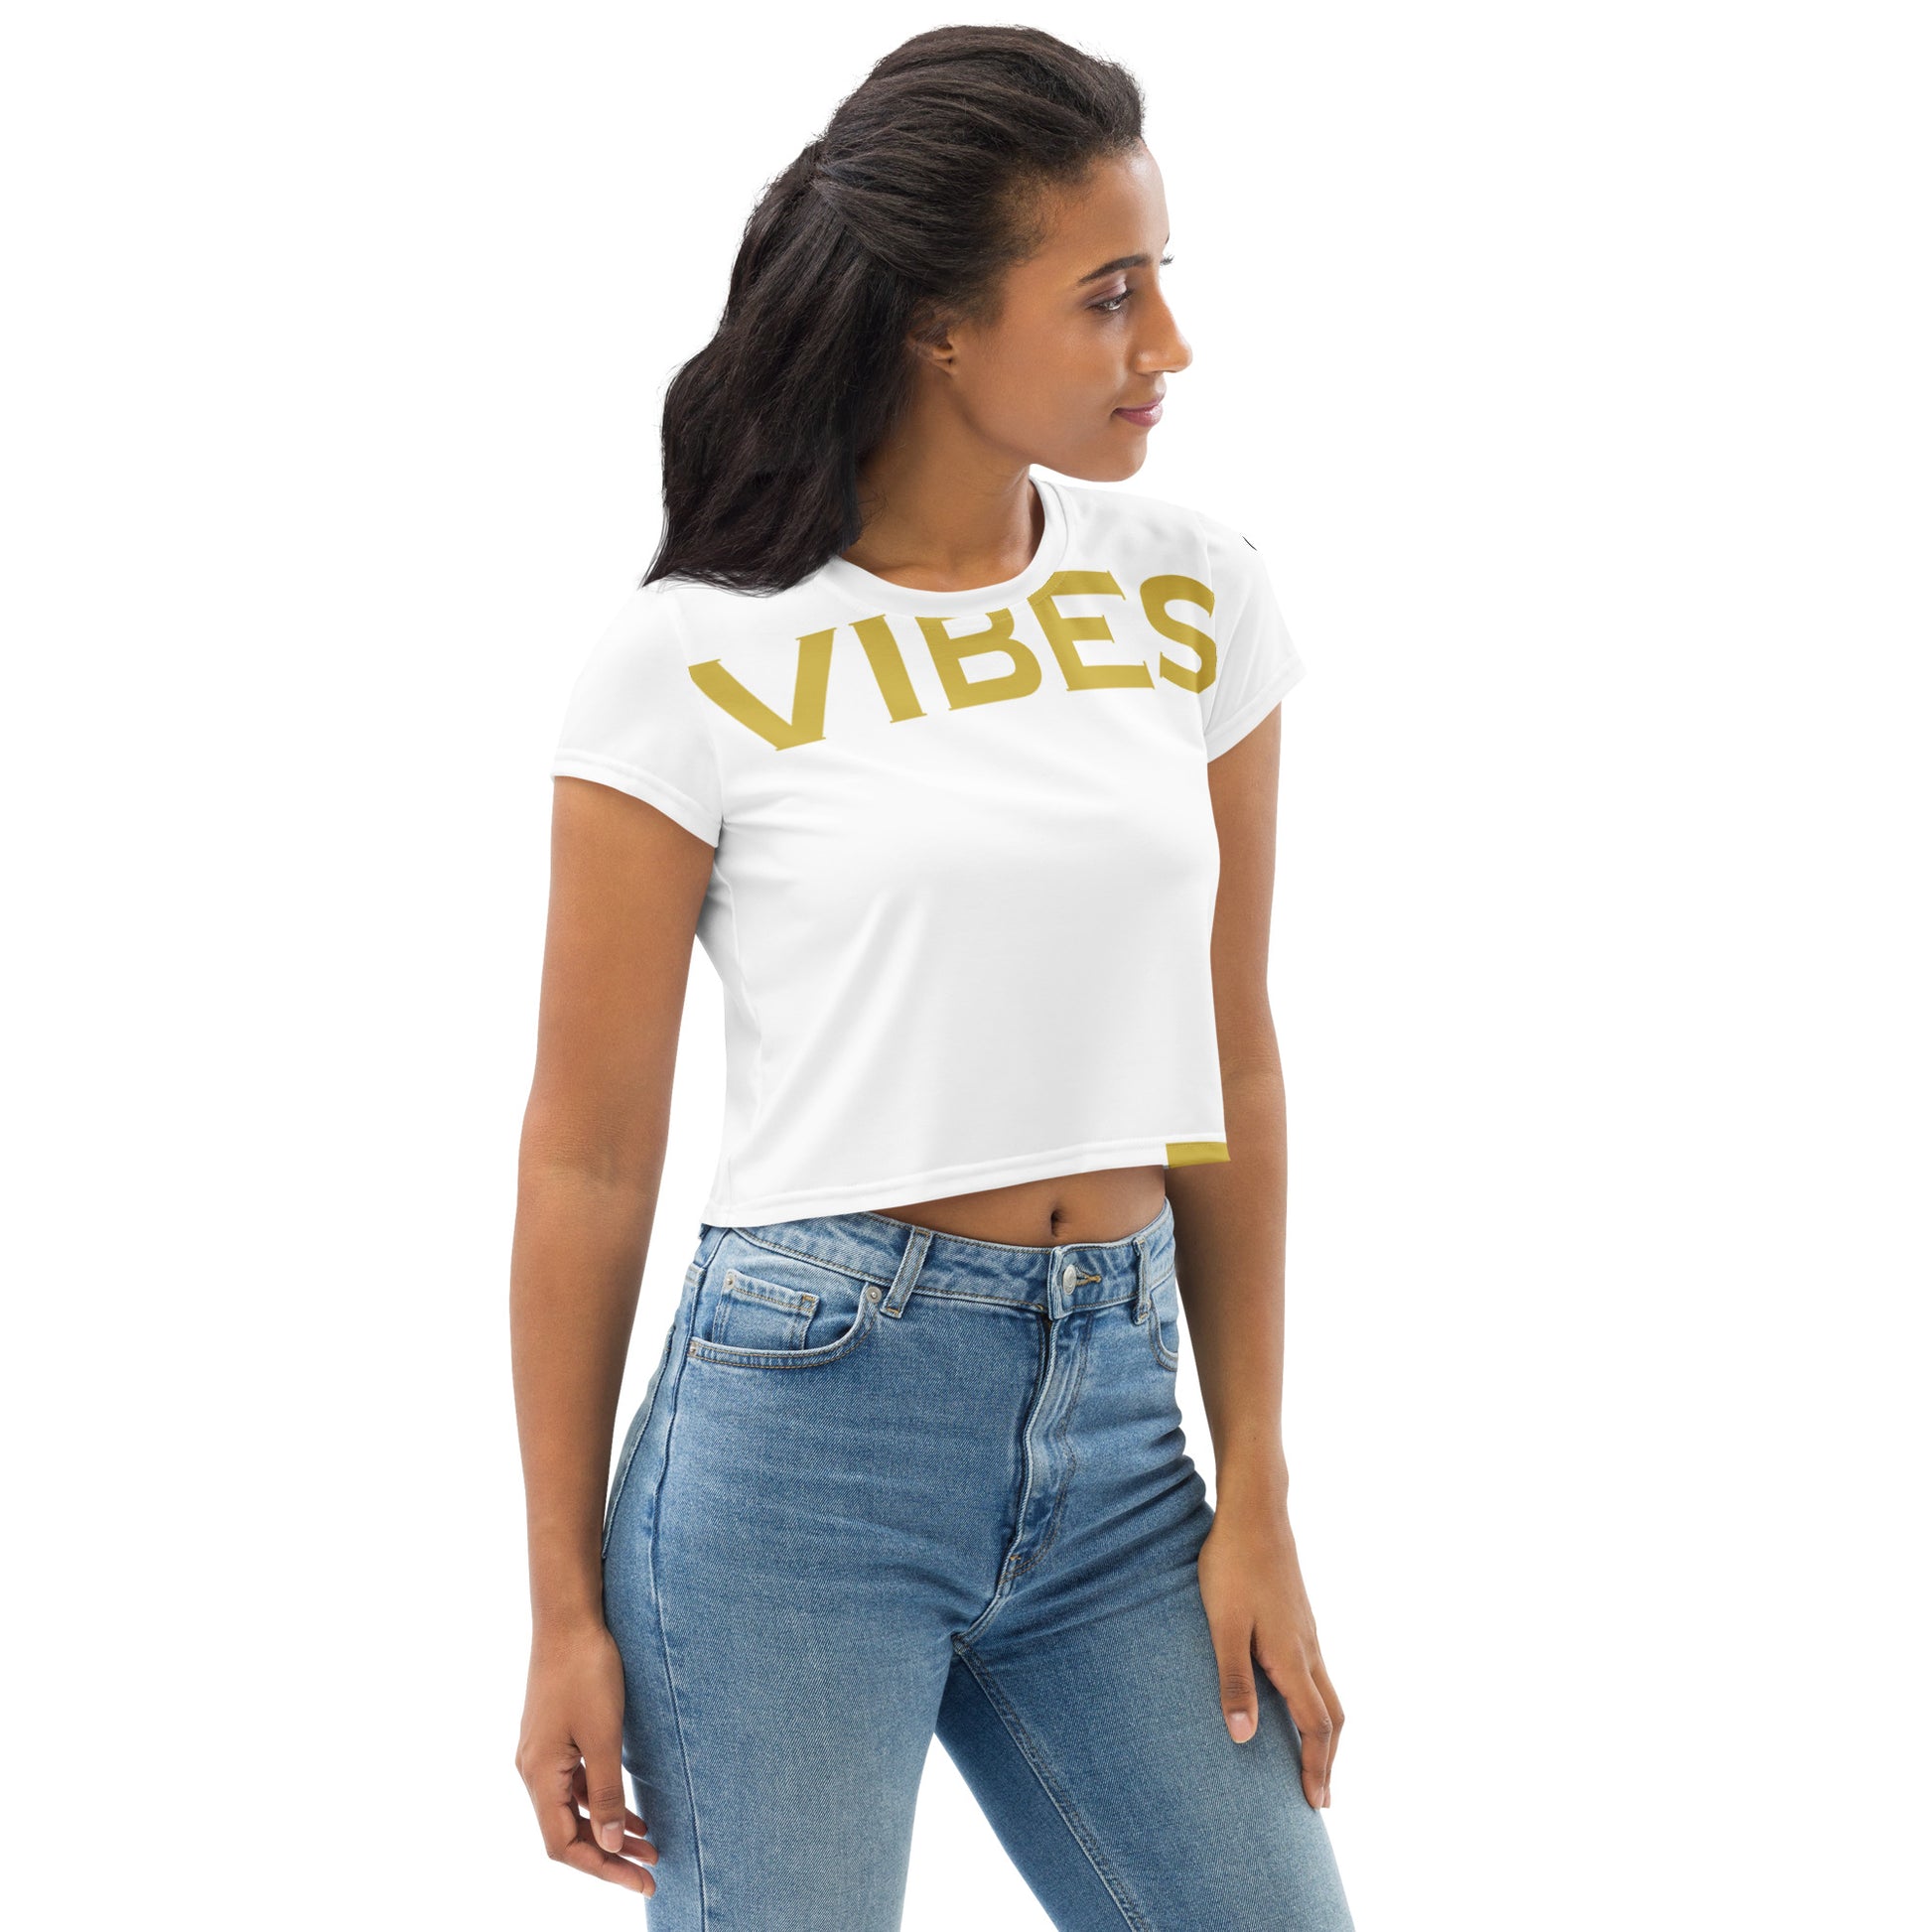 TIME OF VIBES - Crop Tee VIBES (White/Gold) - €46.50